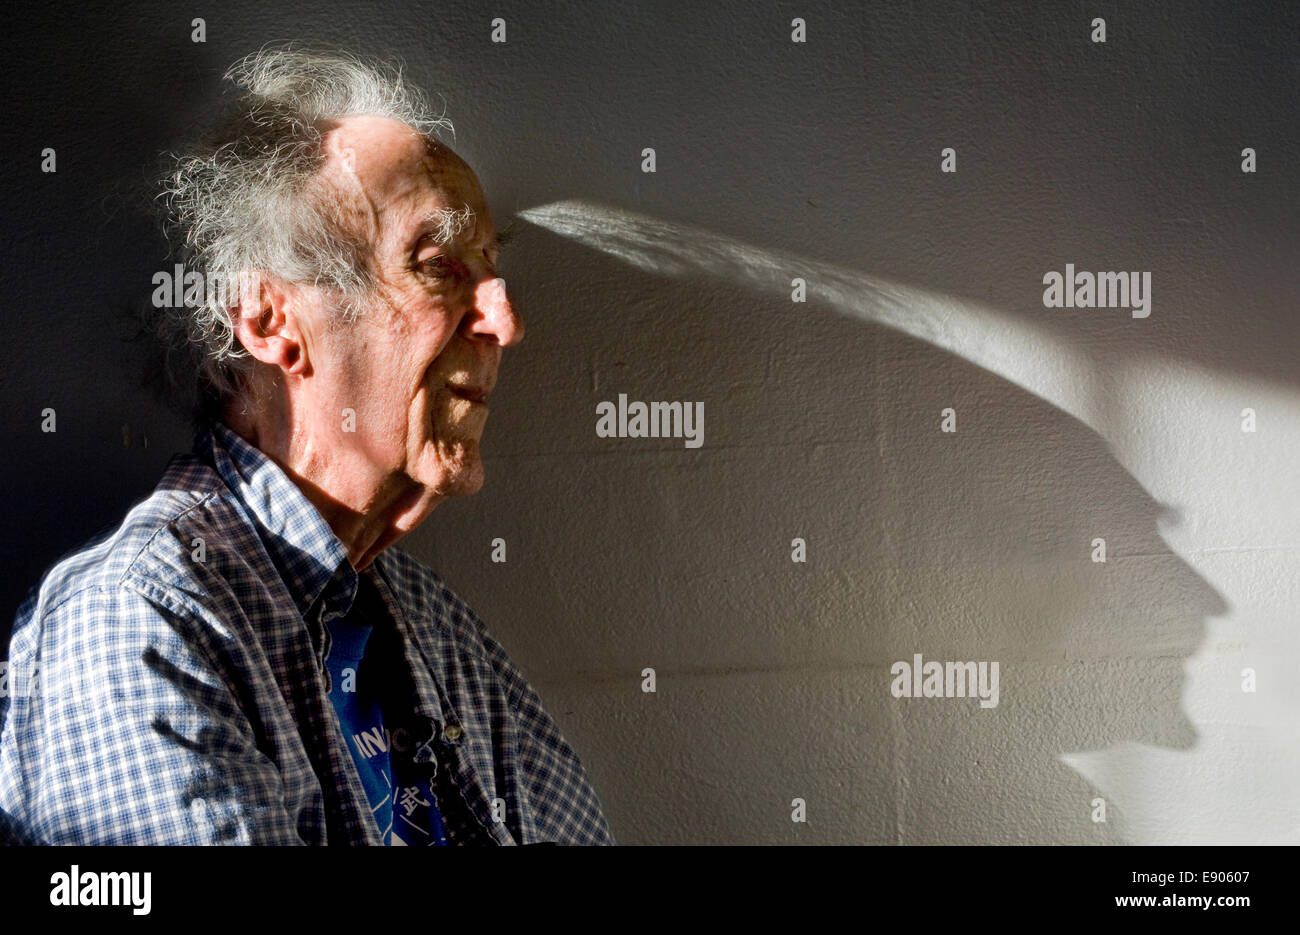 An elderly man casts a long shadow while listening to a music concert Stock Photo